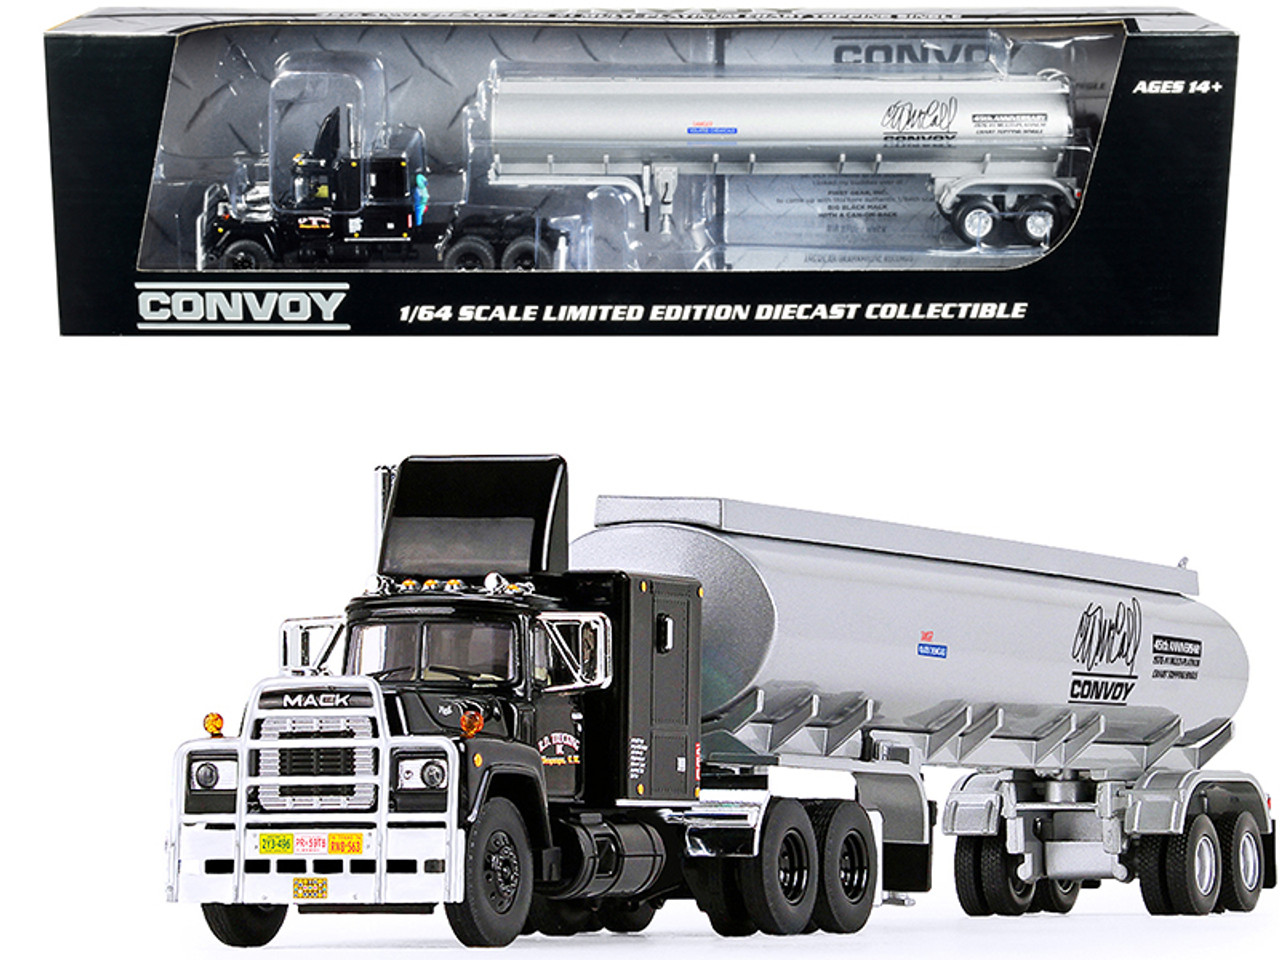 Mack R Model with Sleeper Cab Truck with Fuel Tanker Trailer "R.D. Trucking Inc." Black and Silver "Convoy" (1978) Movie "45th Anniversary" 1/64 Diecast Model by DCP/First Gear